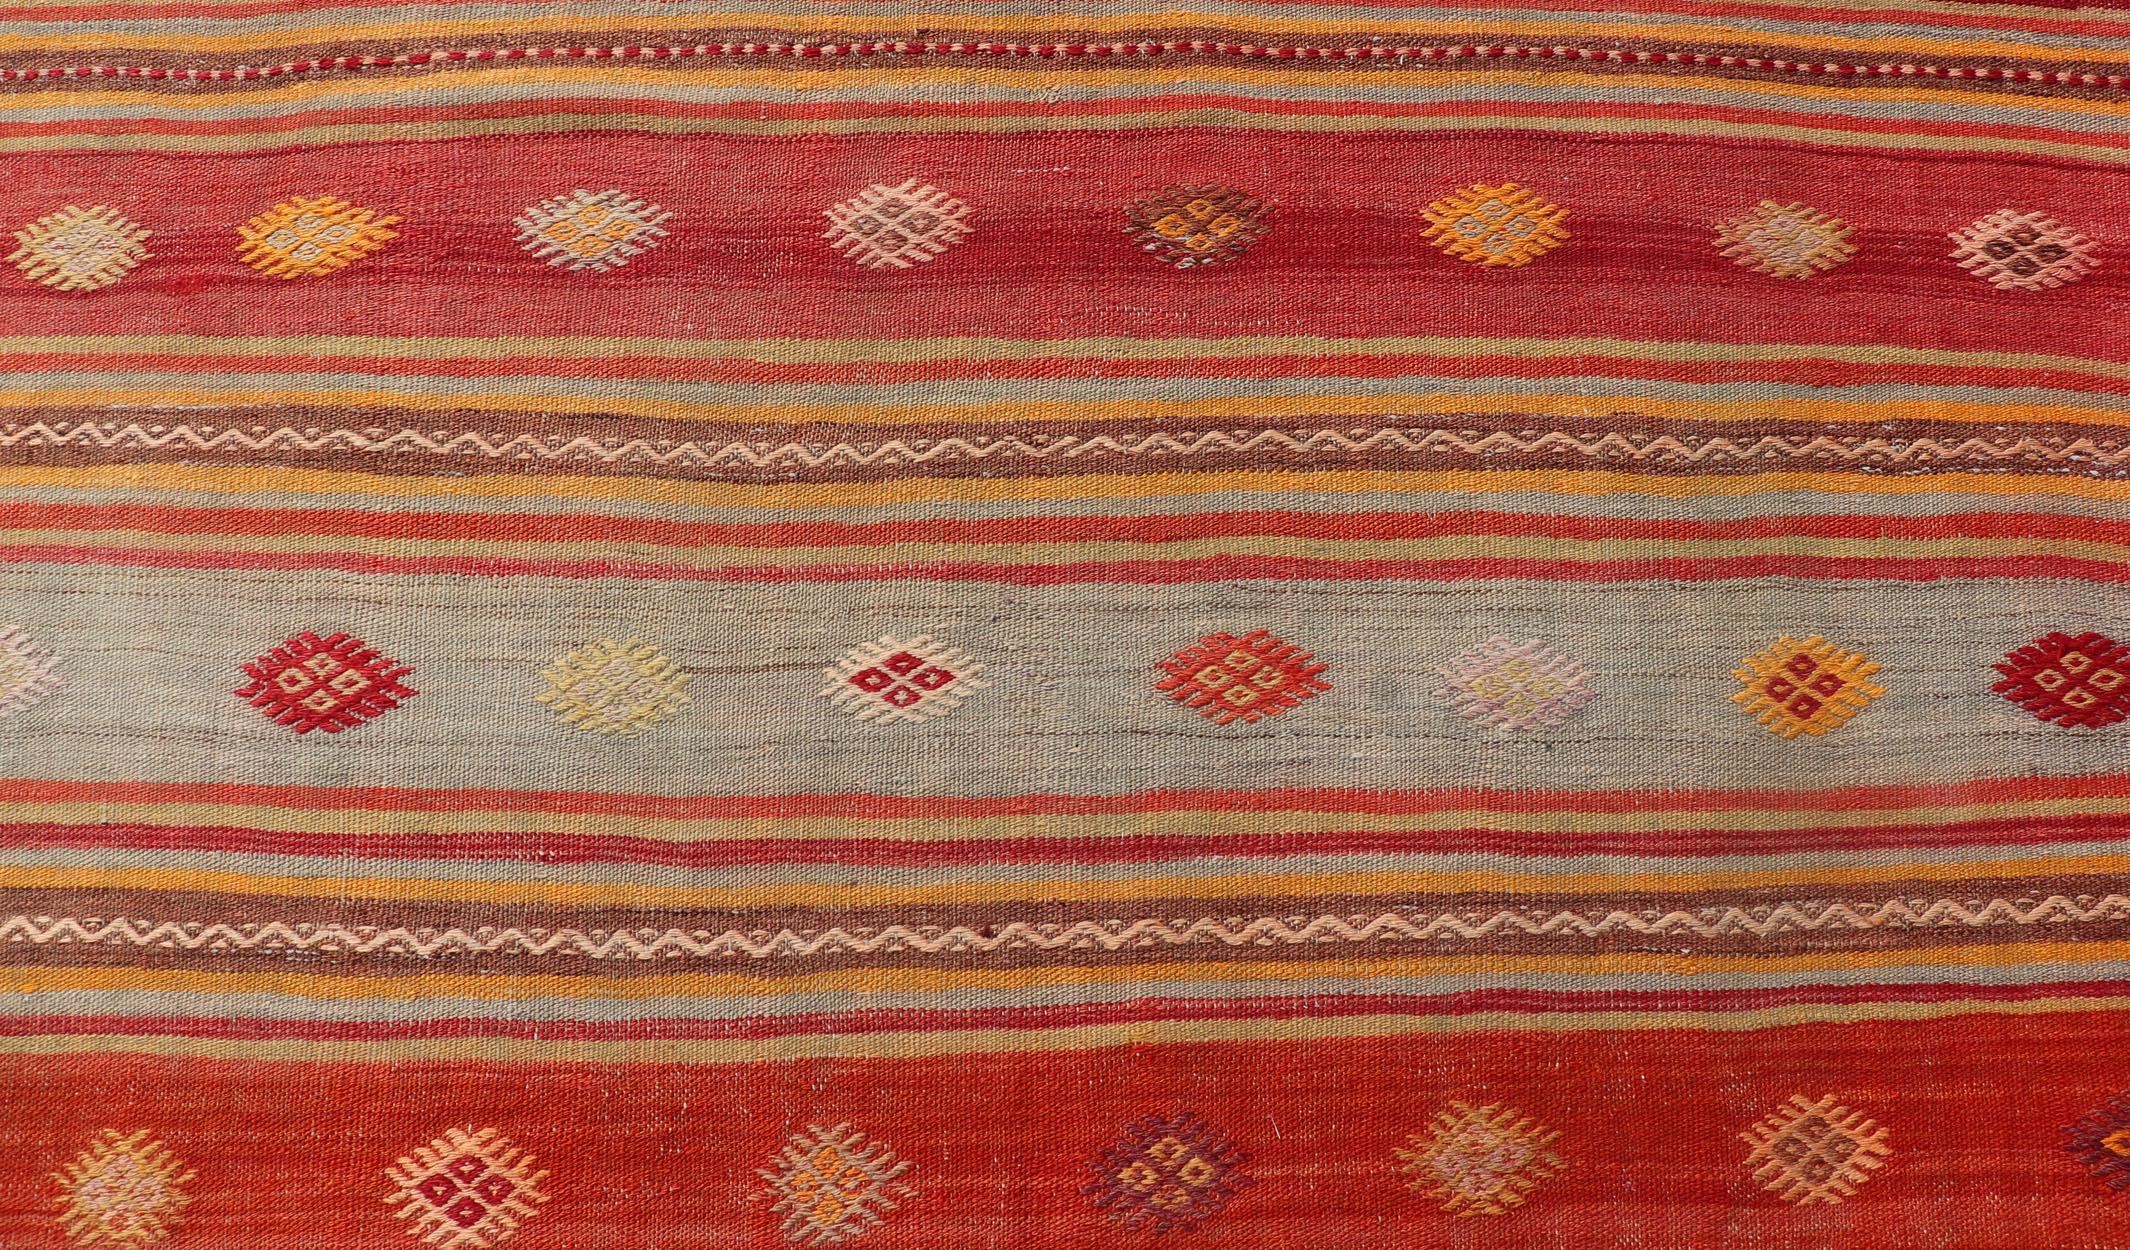 Colorful Vintage Turkish Embroidered Kilim with Stripes and Geometric Motifs For Sale 2